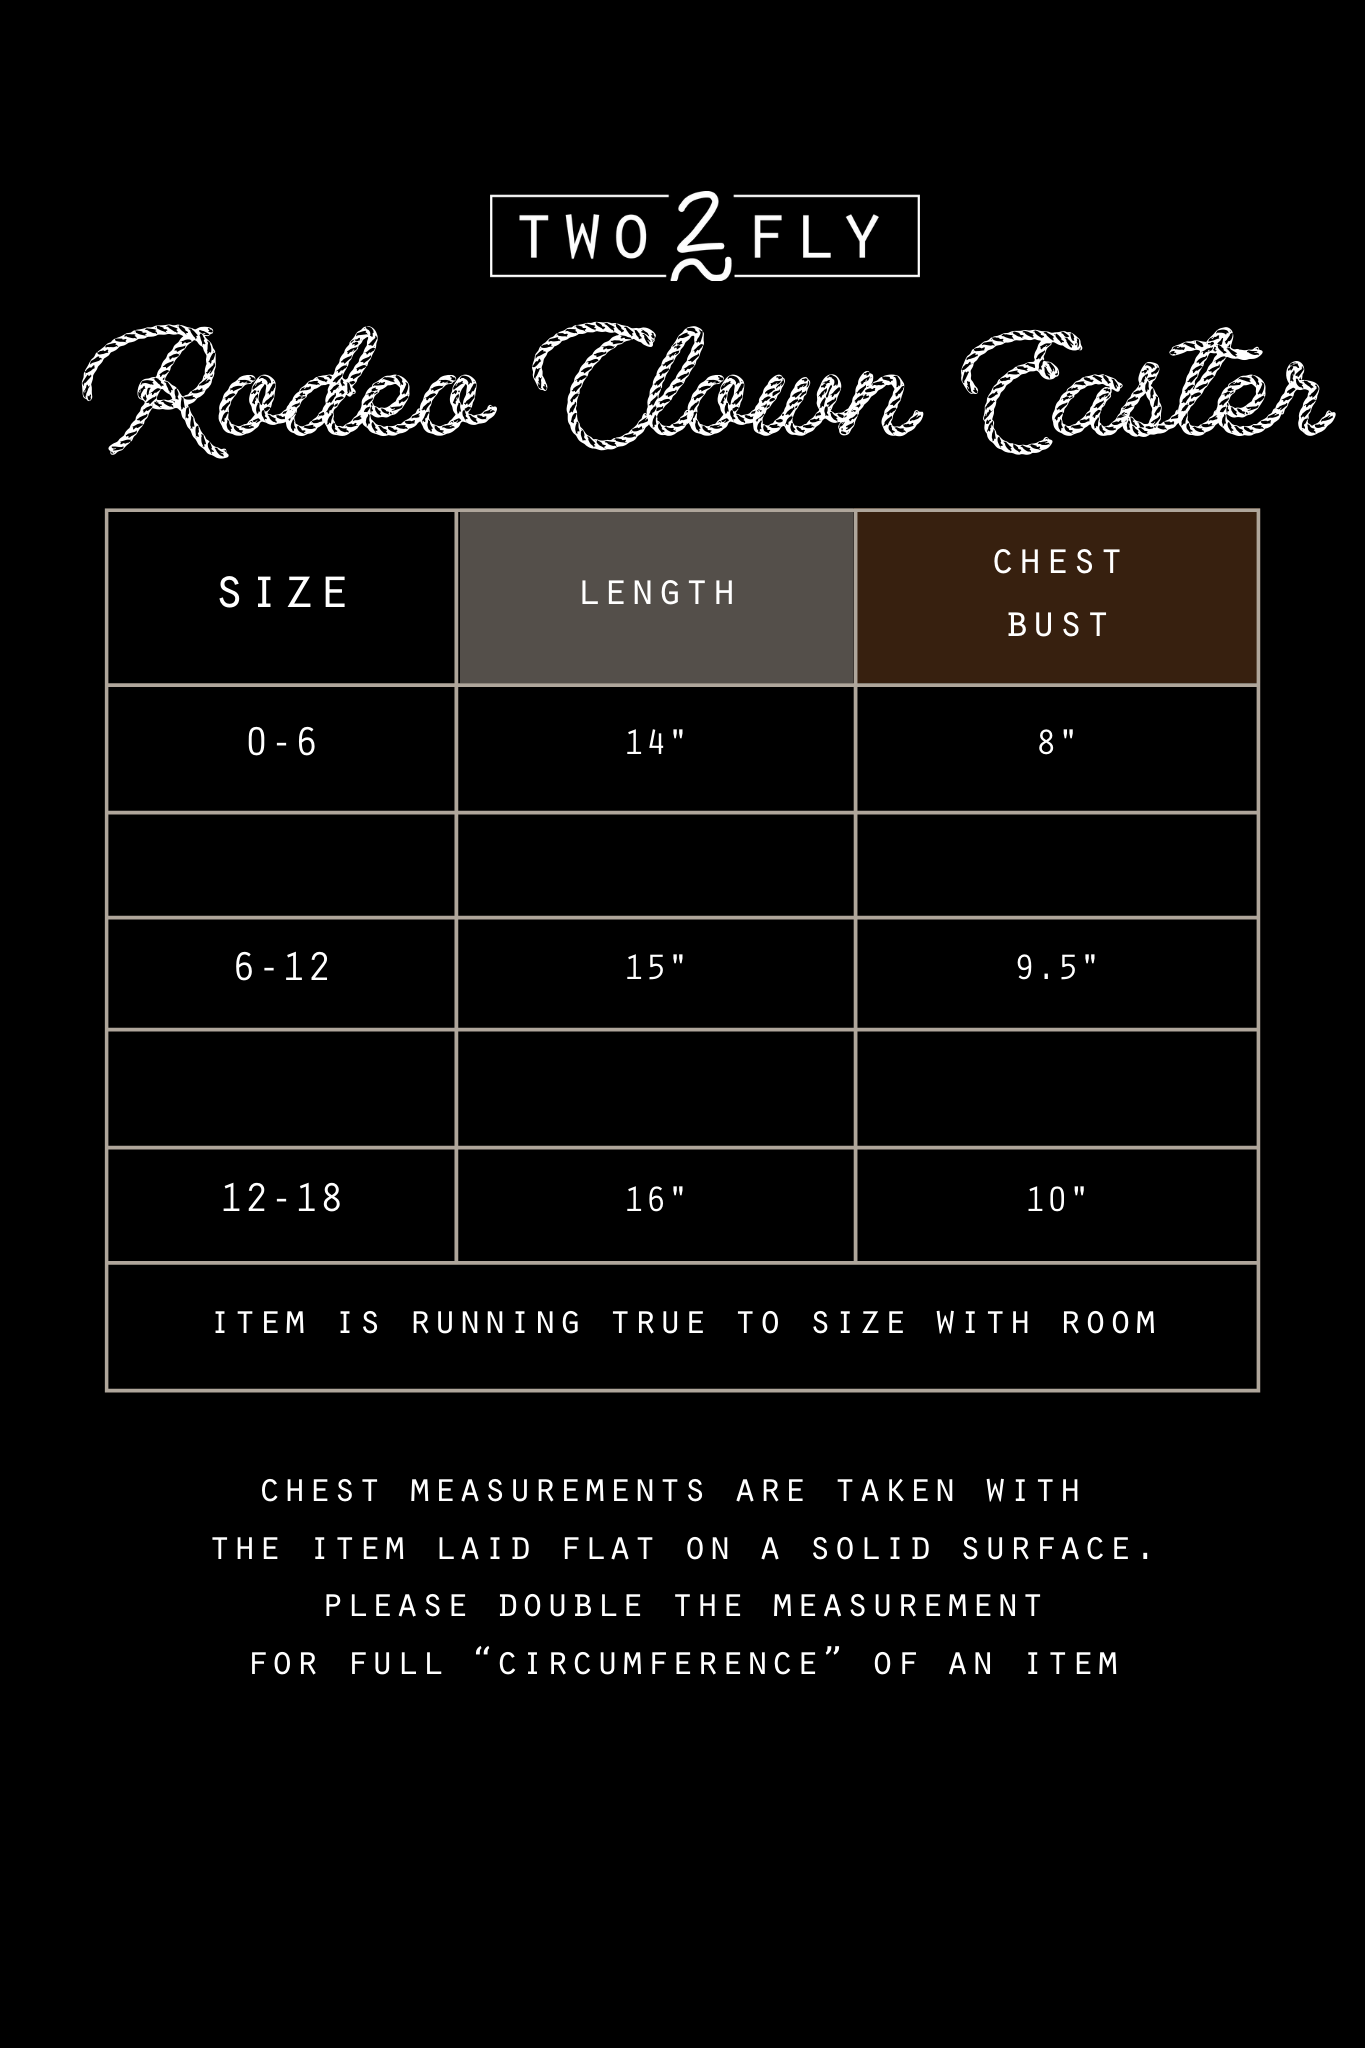 RODEO CLOWN EASTER [BABY]